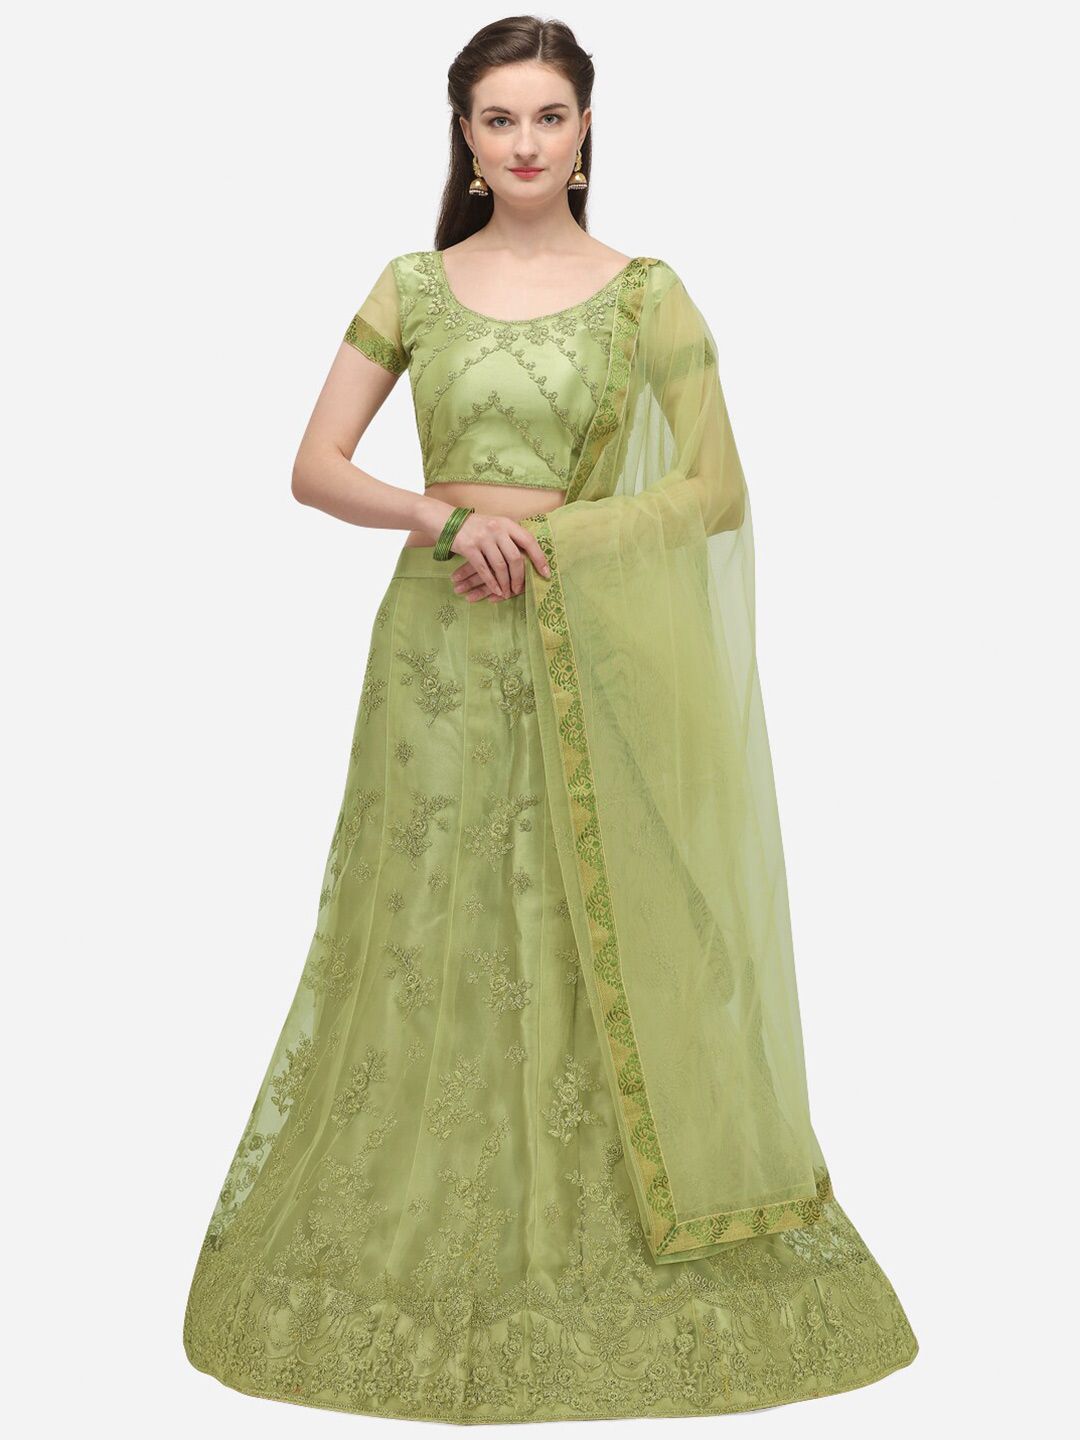 Netram Lime Green & Gold-Toned Embroidered Semi-Stitched Lehenga & Unstitched Blouse With Dupatta Price in India